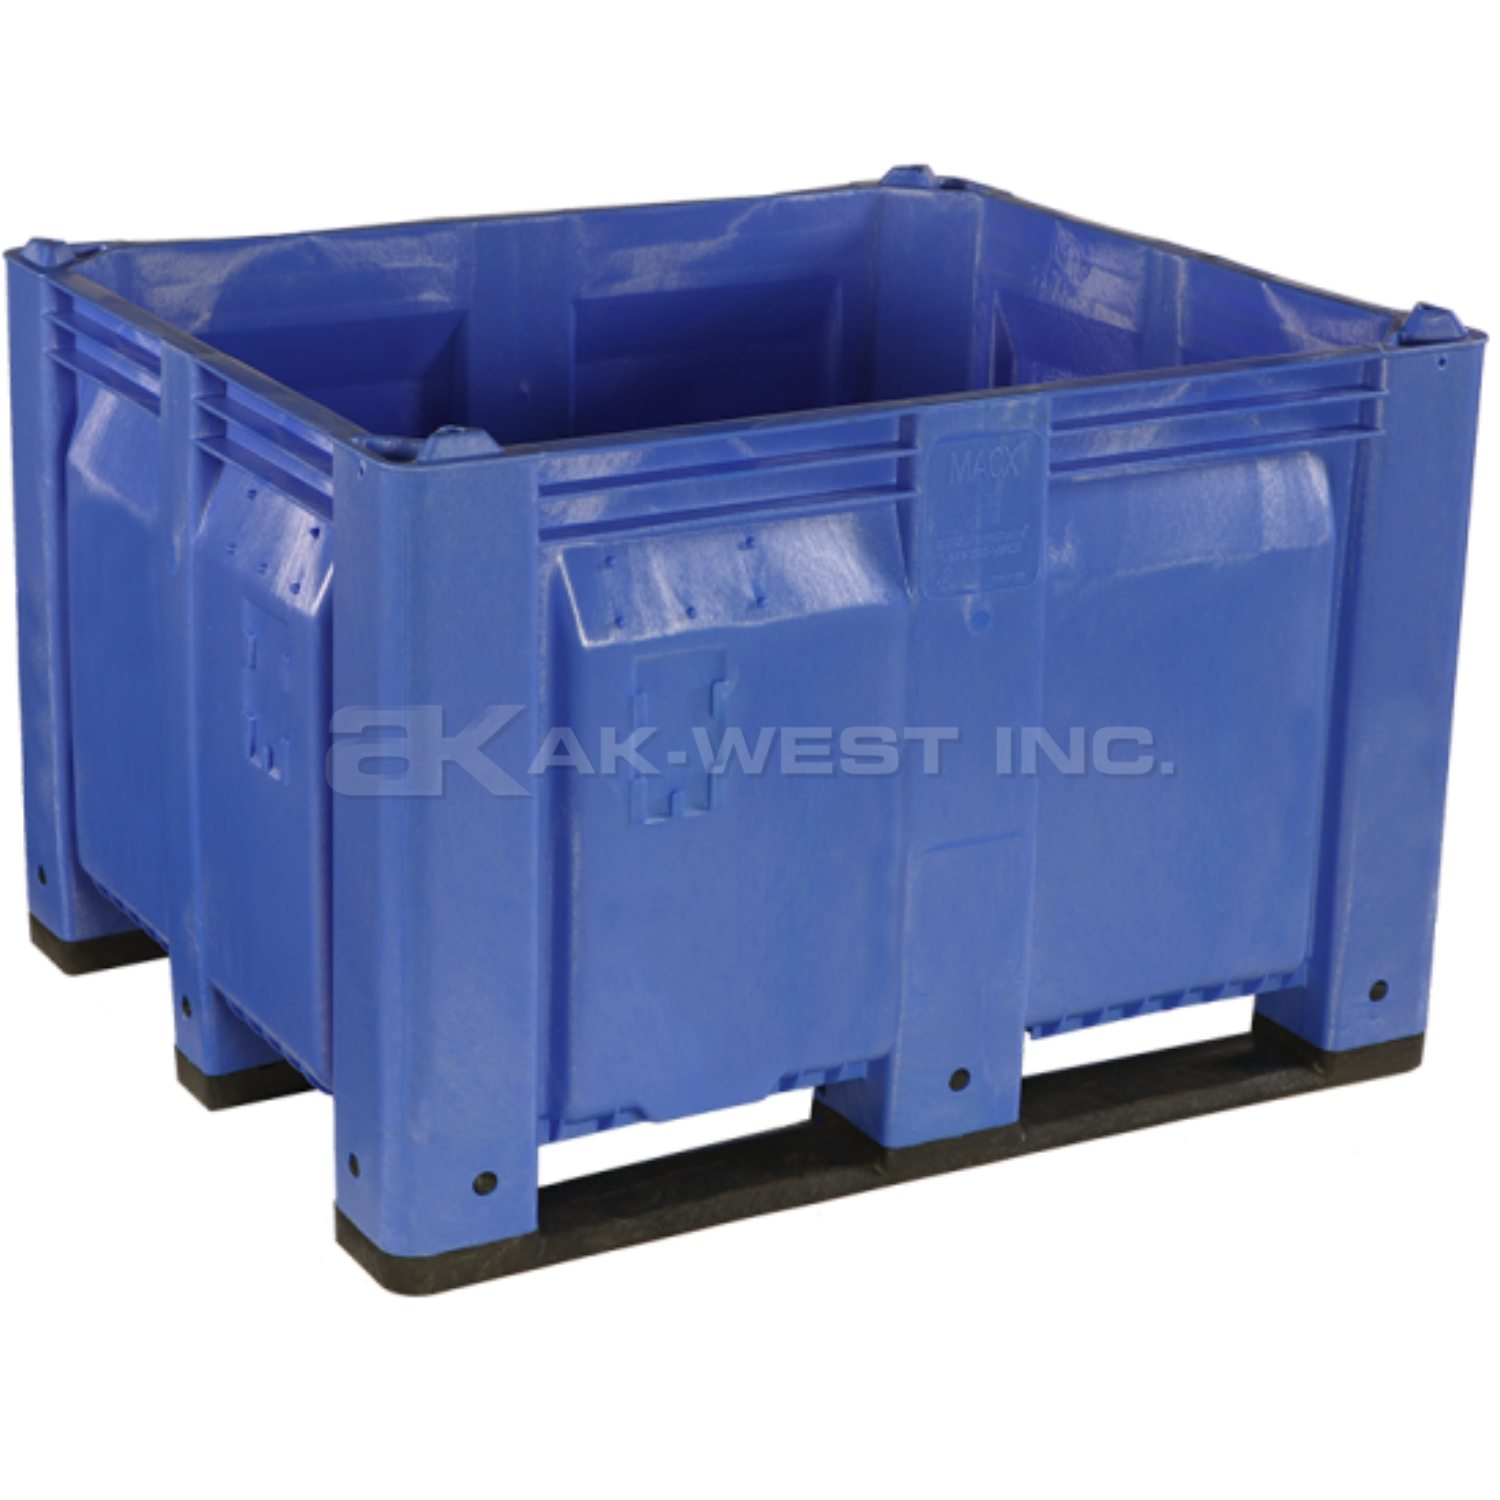 Blue, 48"L x 40"W x 31"H Bulk Container w/ Solid Sides, Long Side Runners